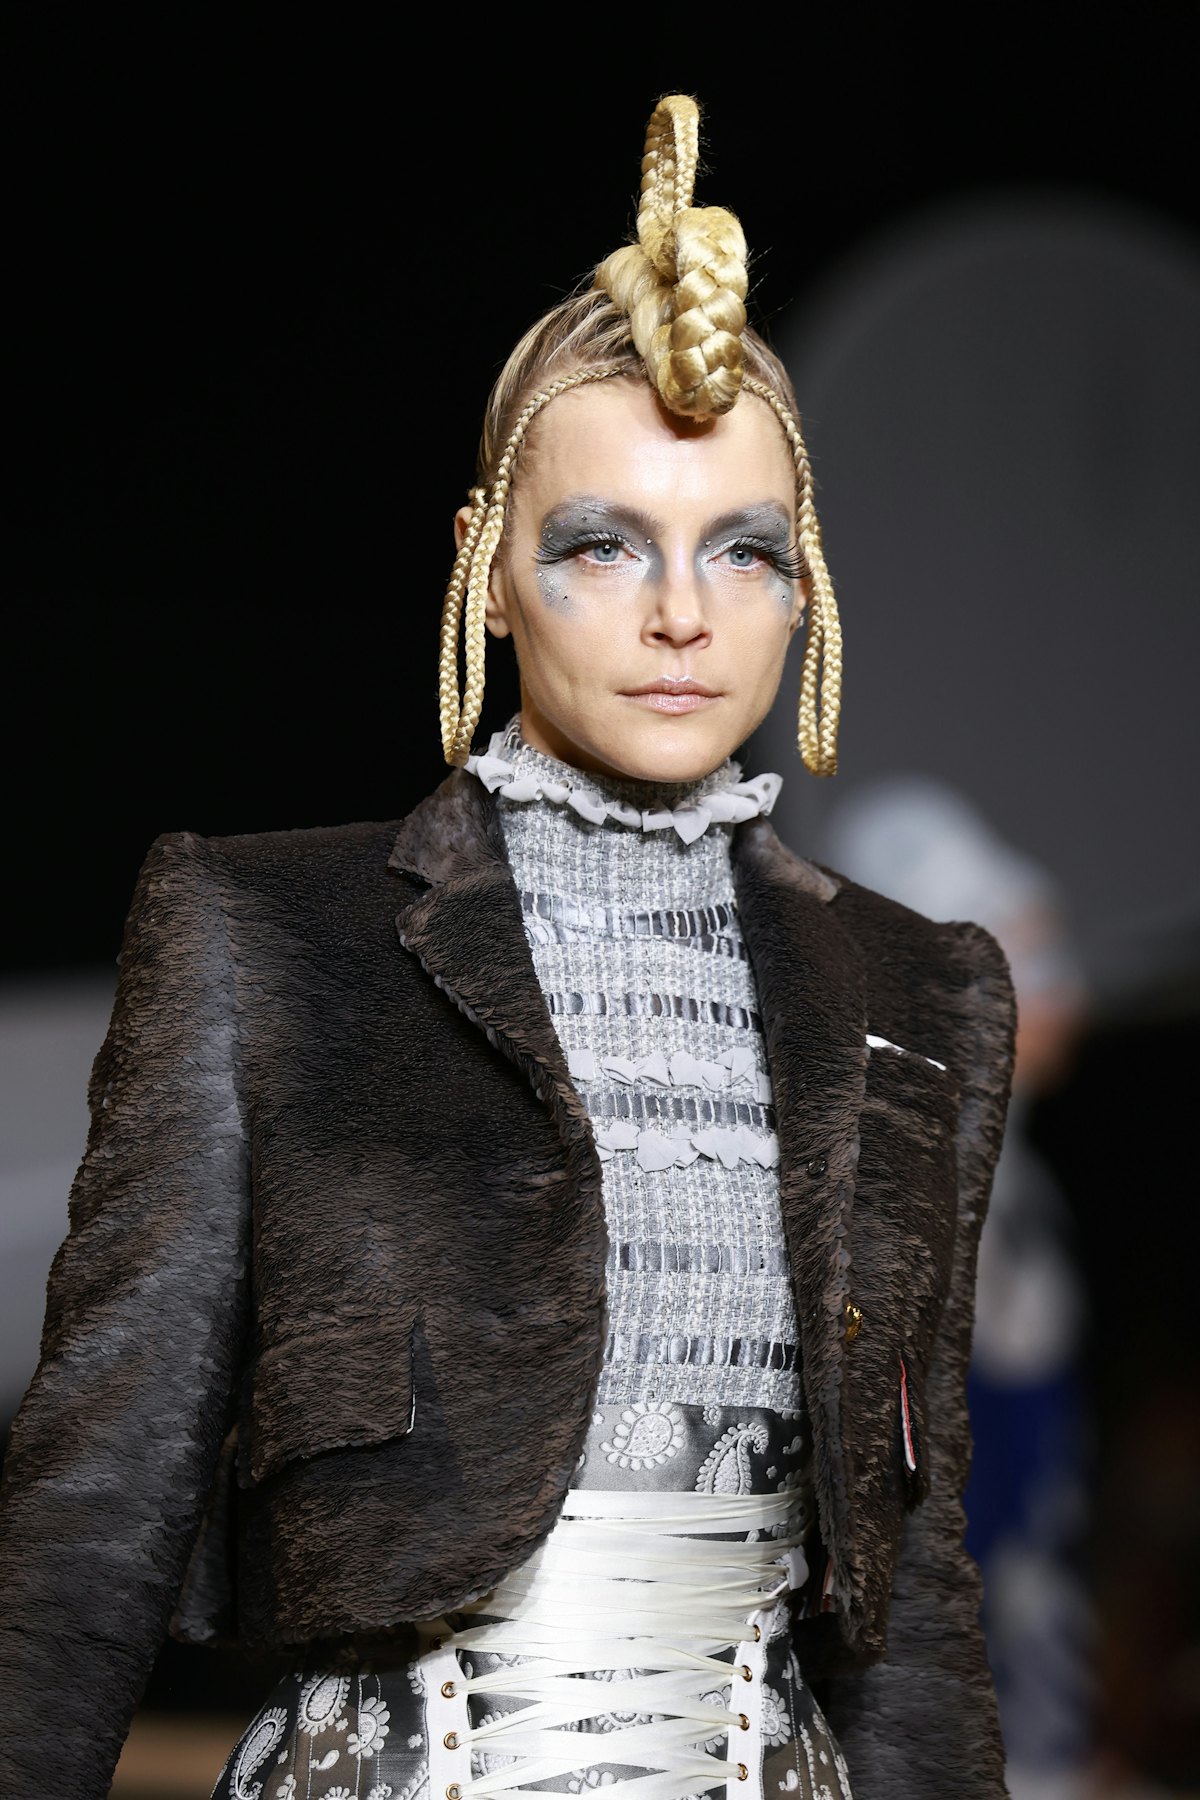 Fairycore makeup spotted at Thom Browne's fall/winter 2023 show.